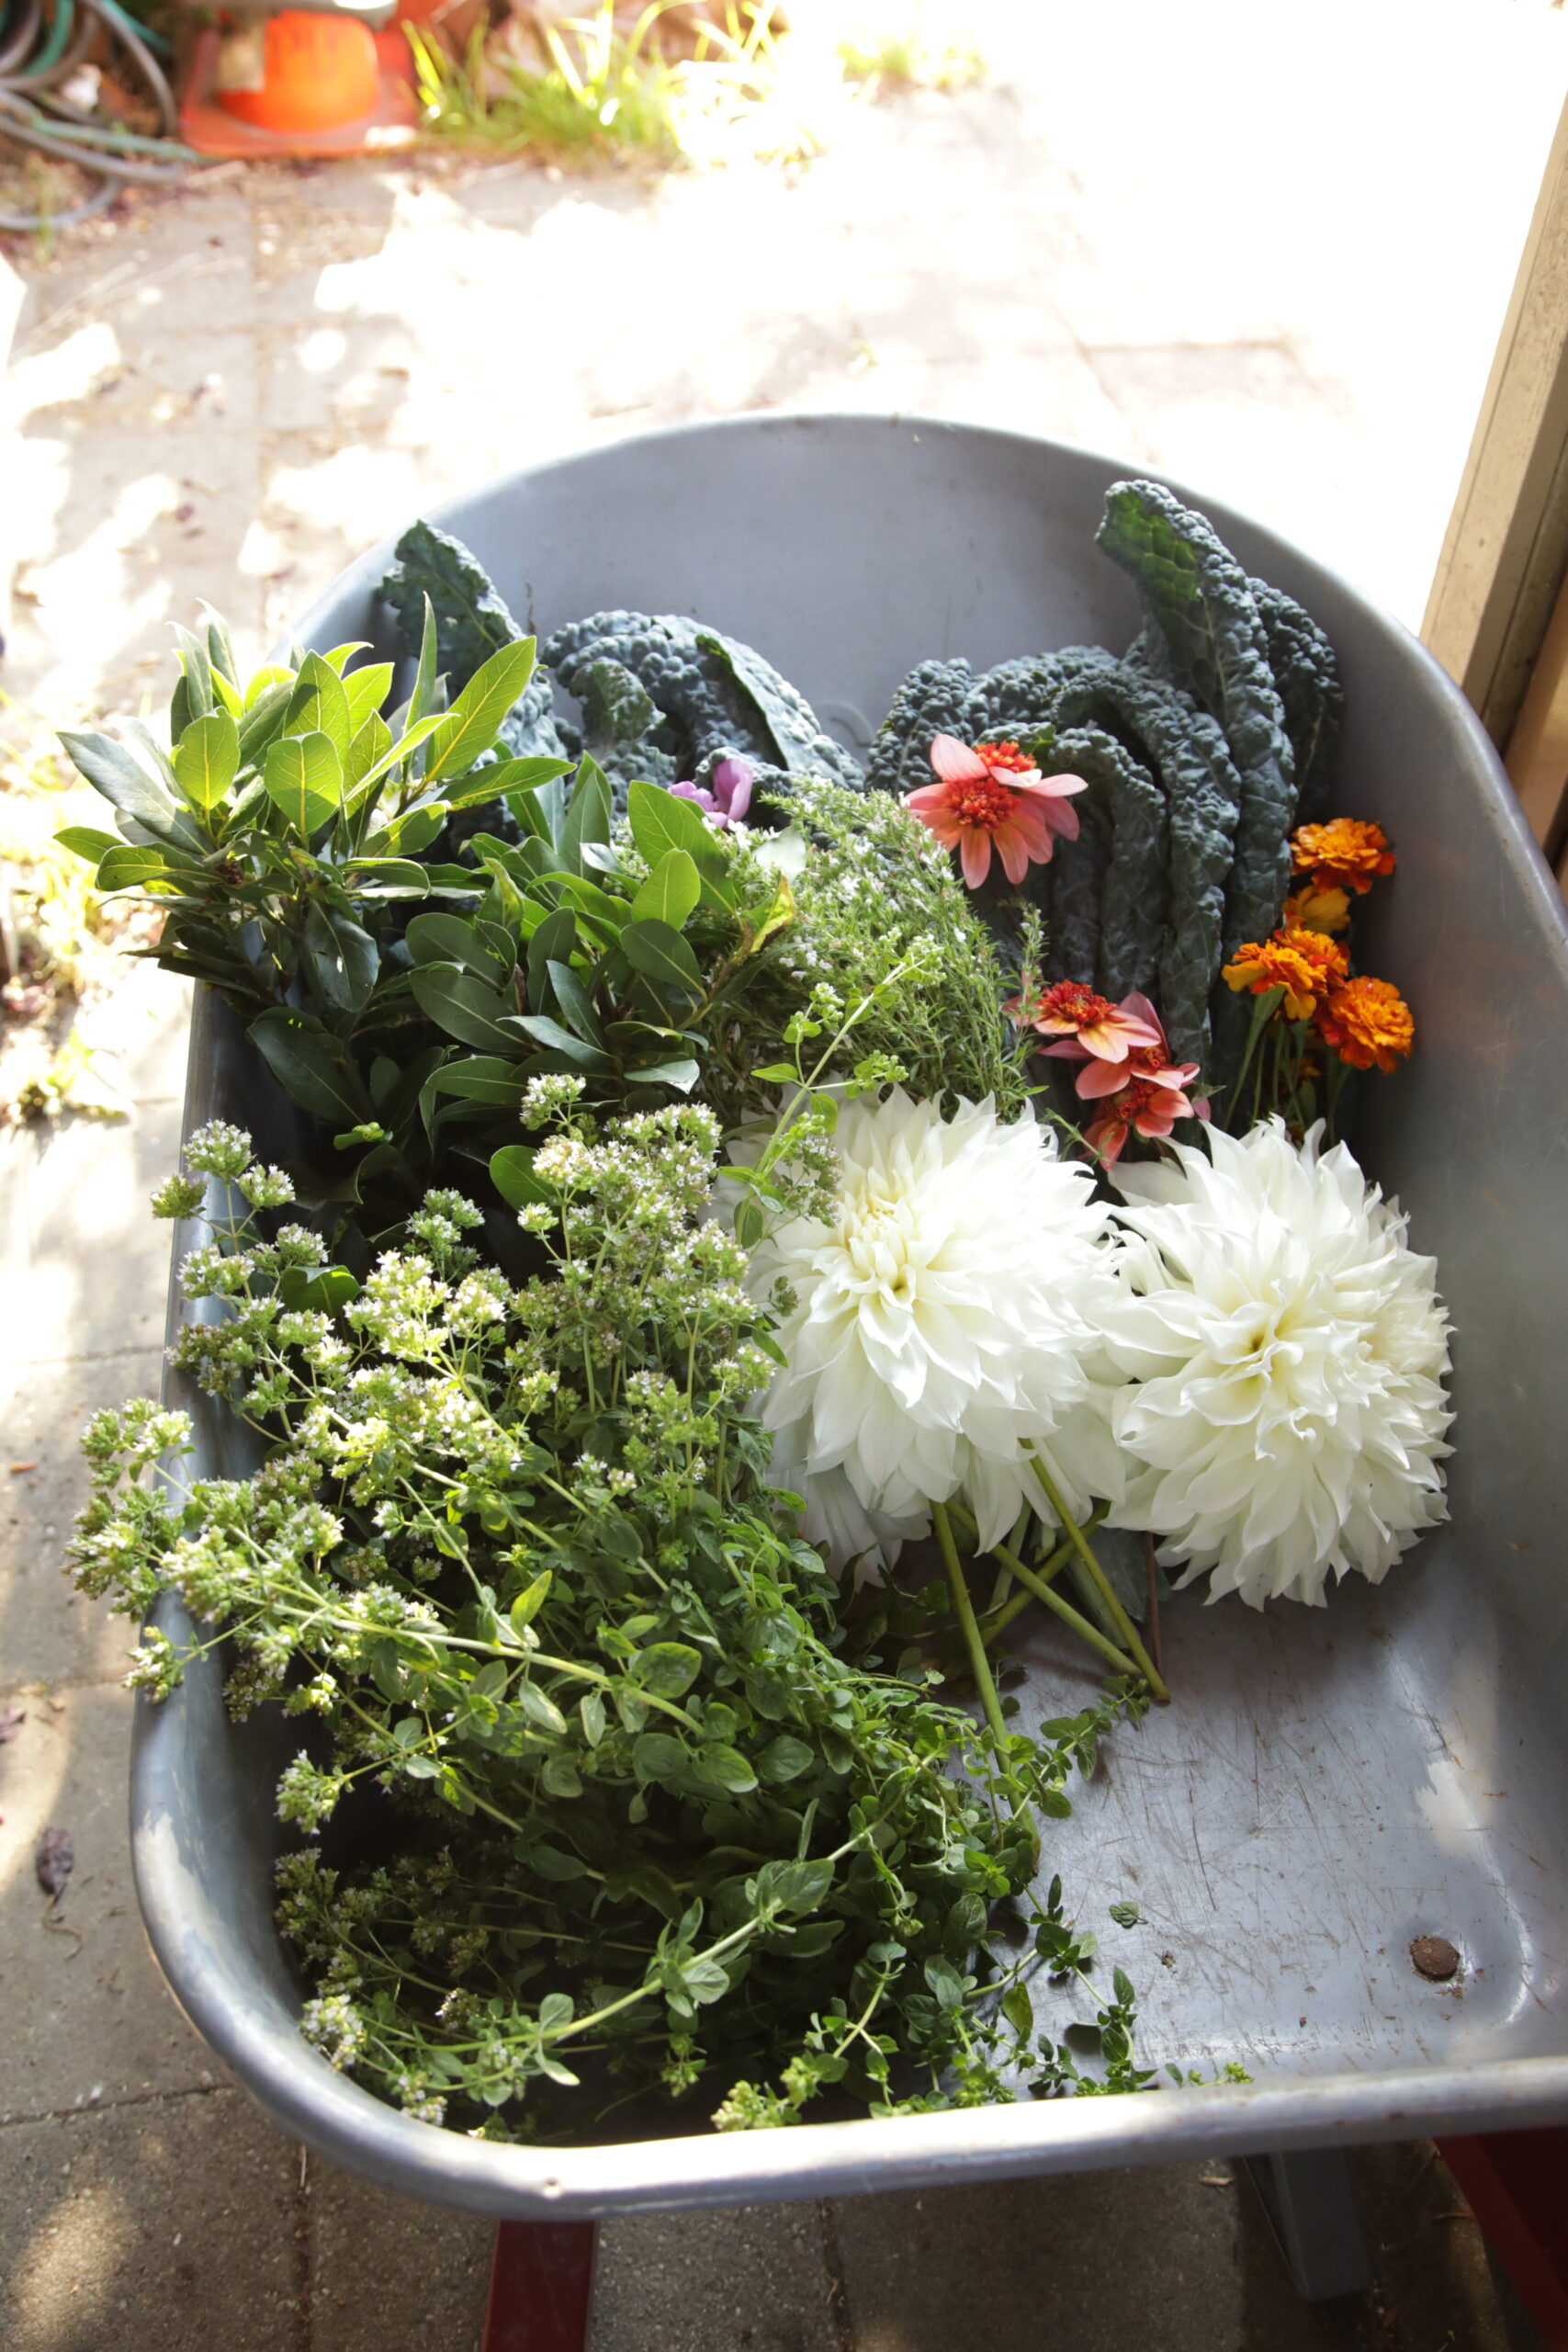 A wheelbarrow filled with kale, herbs and flowers from Picardo garden